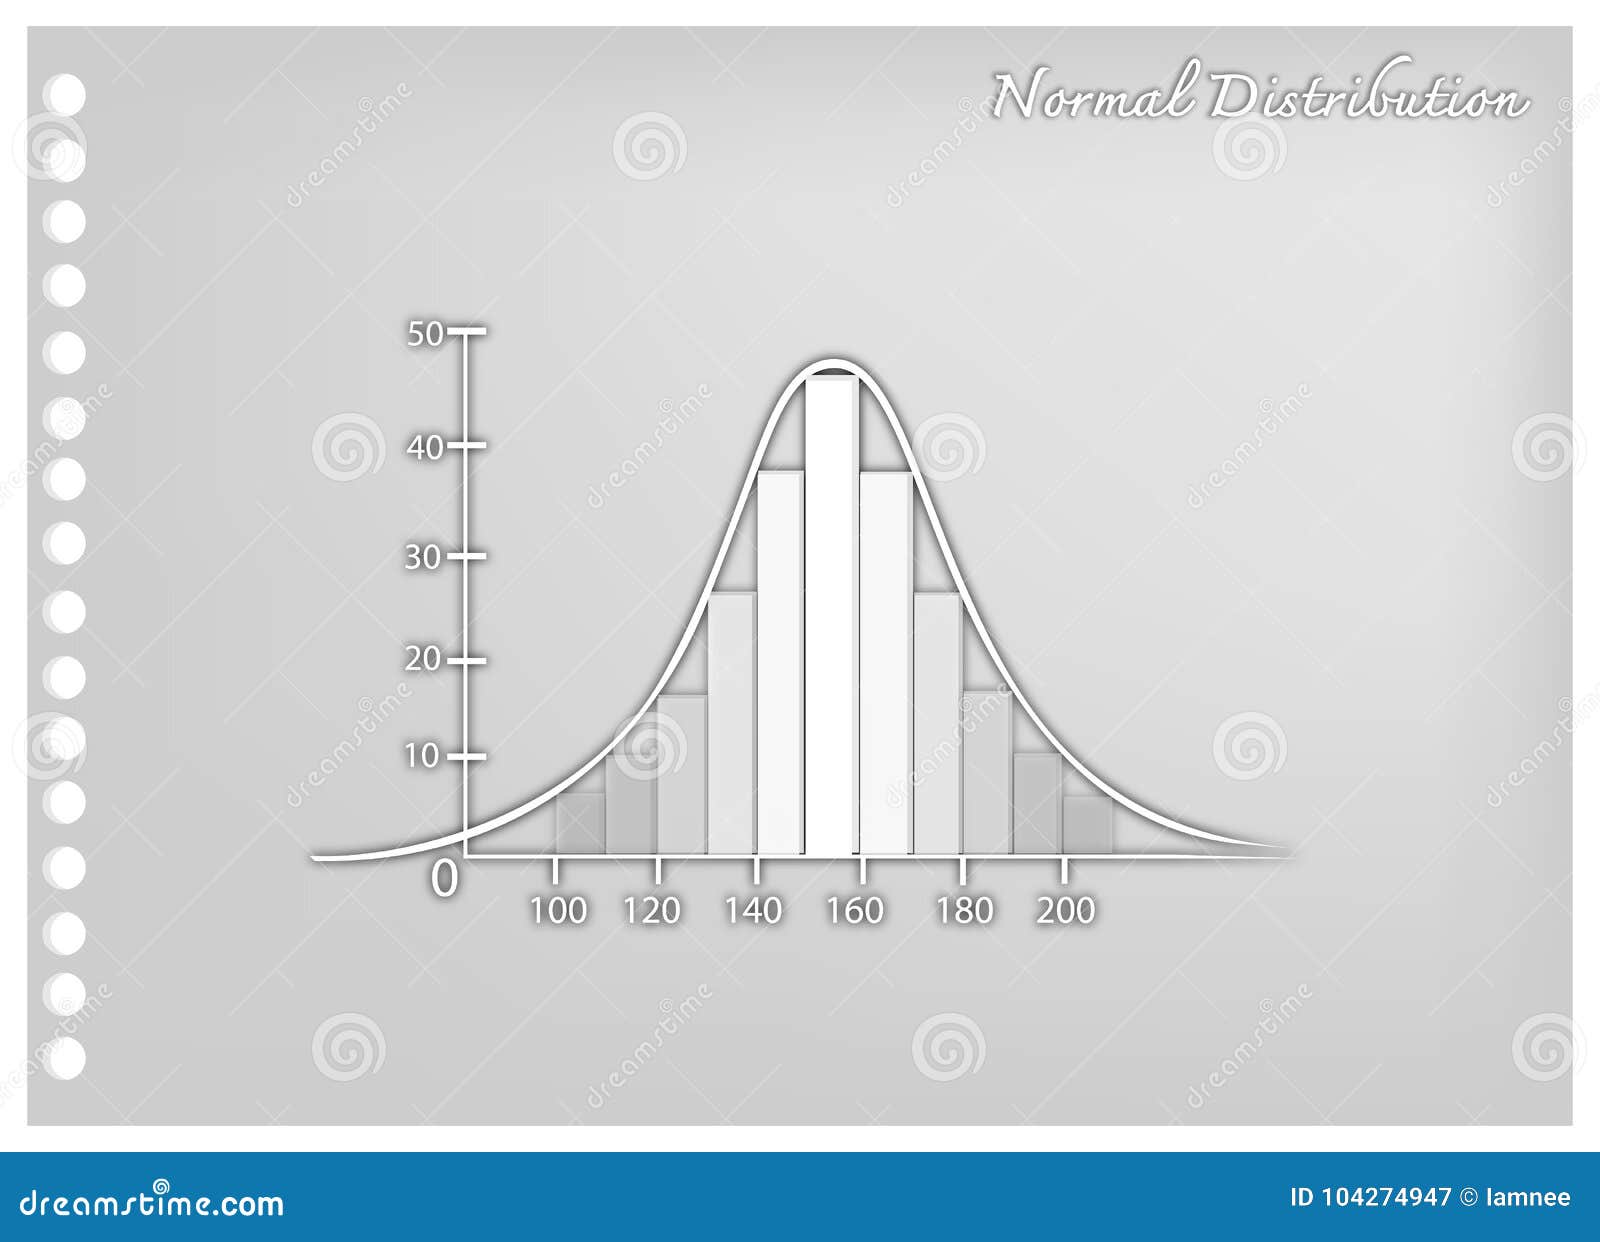 Gaussian or normal distribution graph bell shaped Vector Image